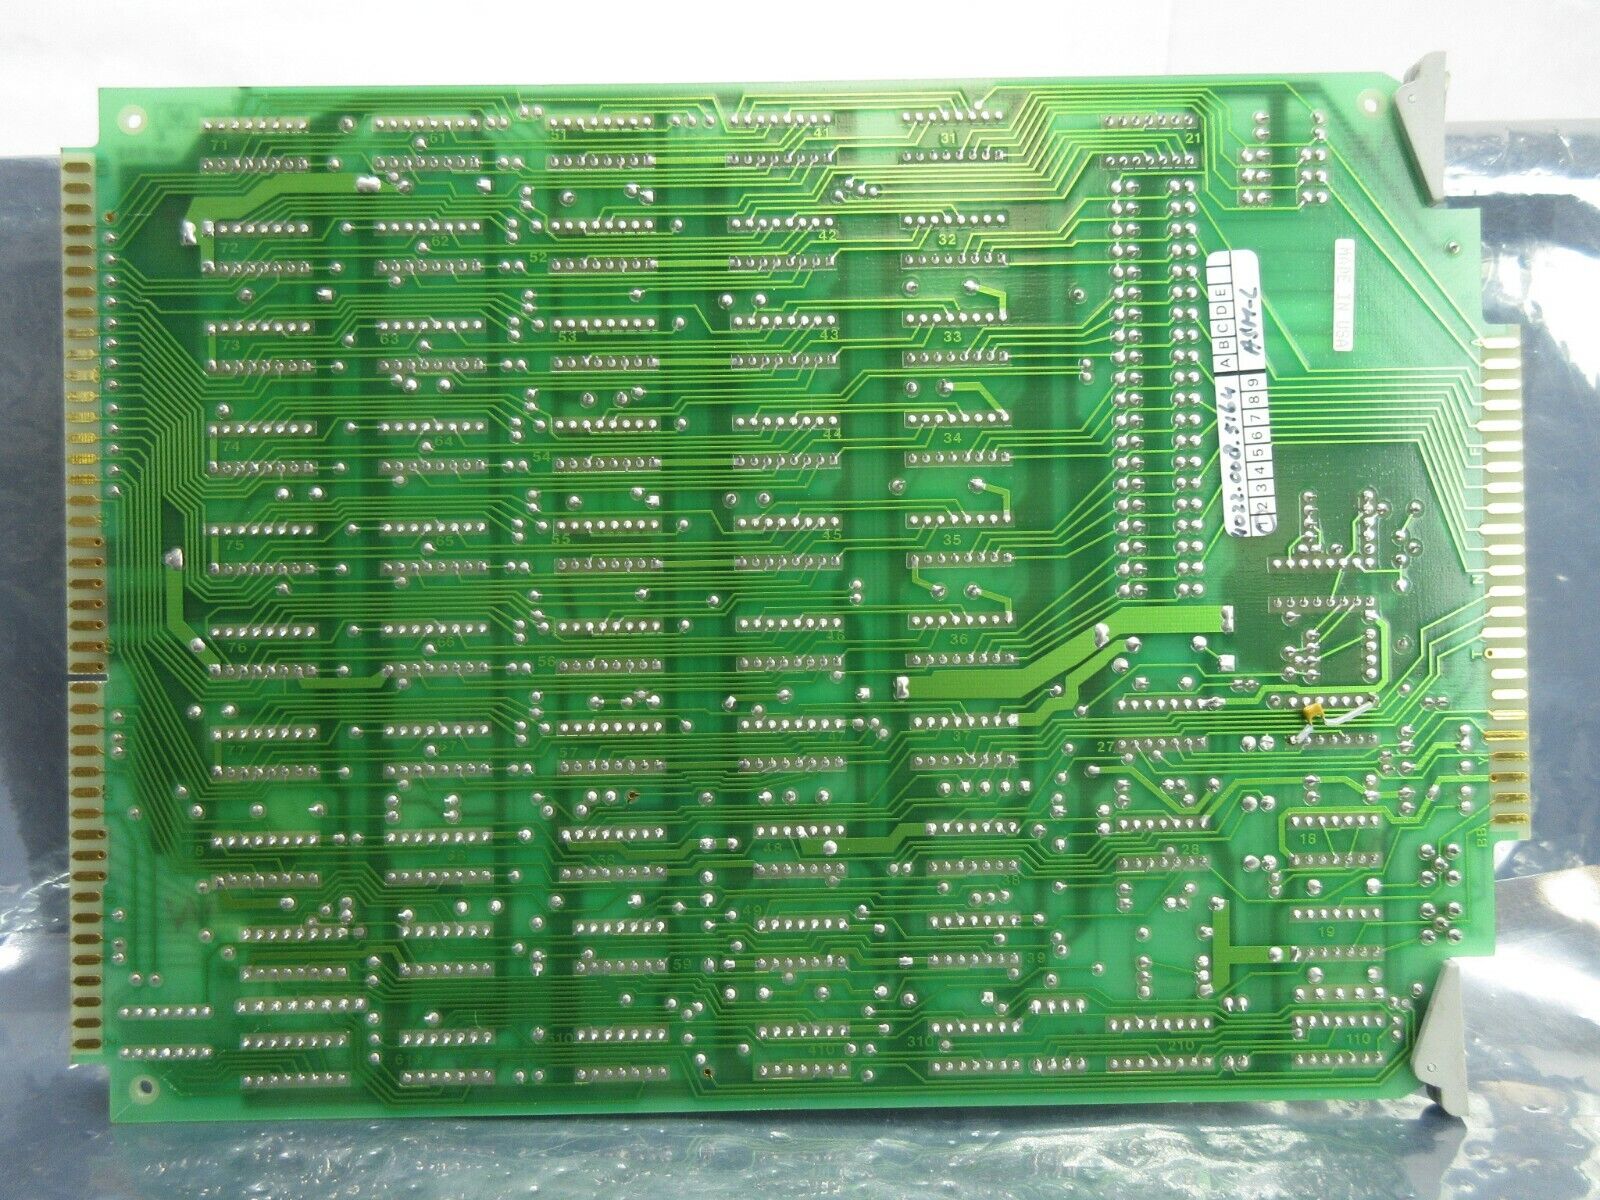 HP Hewlett-Packard 10762-60001 Comparator PCB Card ASML 4022.008.5164 PAS Used